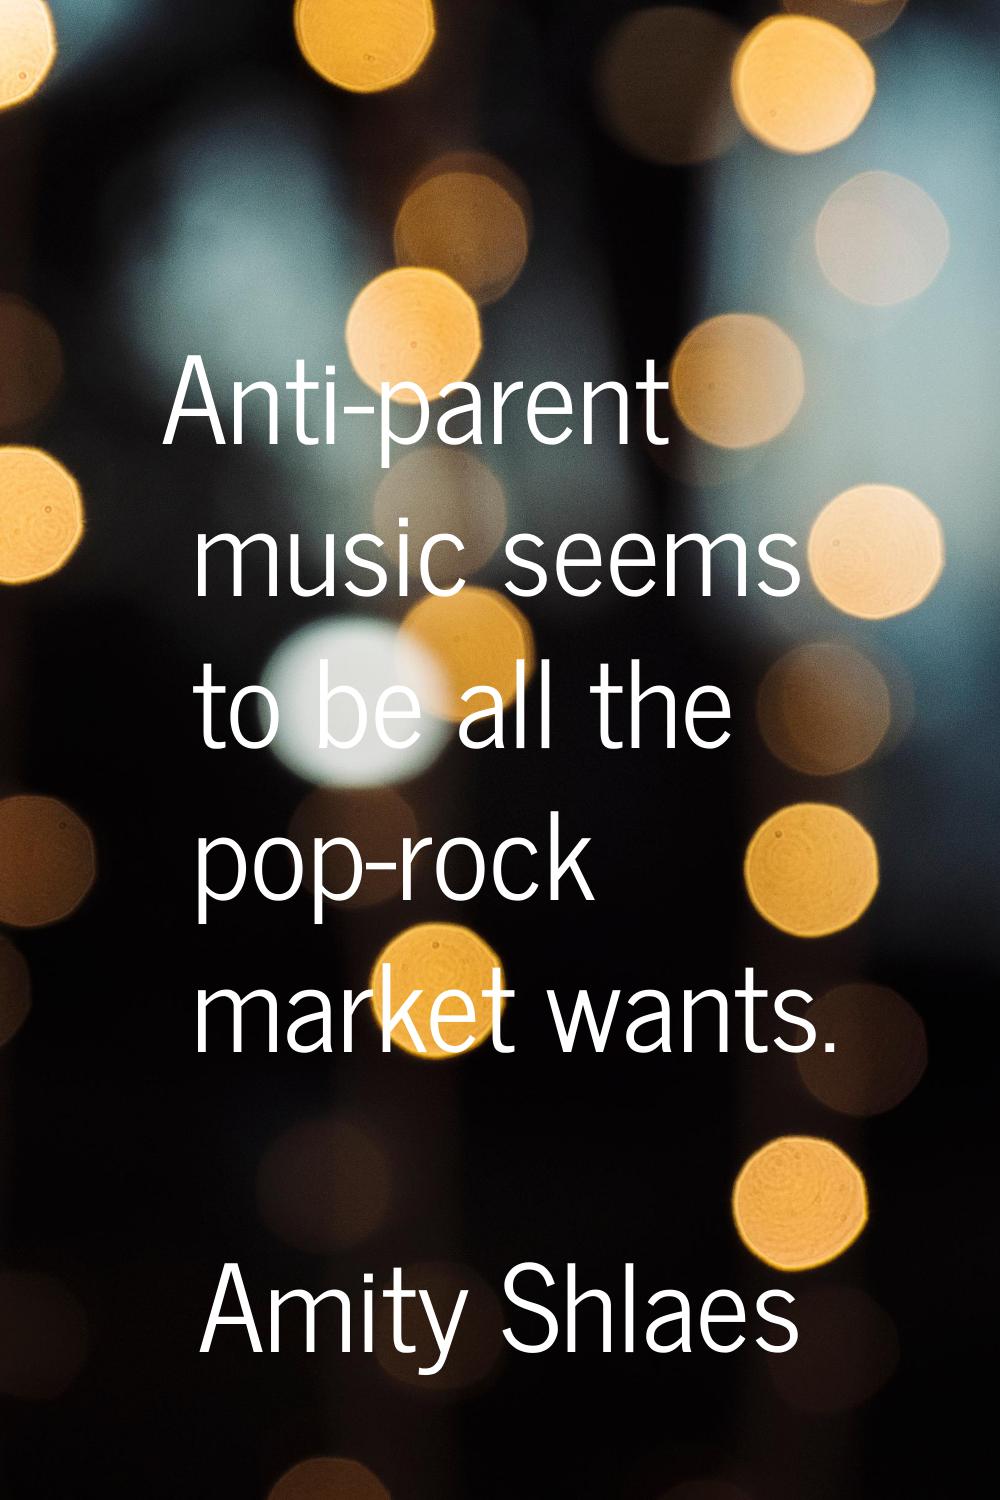 Anti-parent music seems to be all the pop-rock market wants.